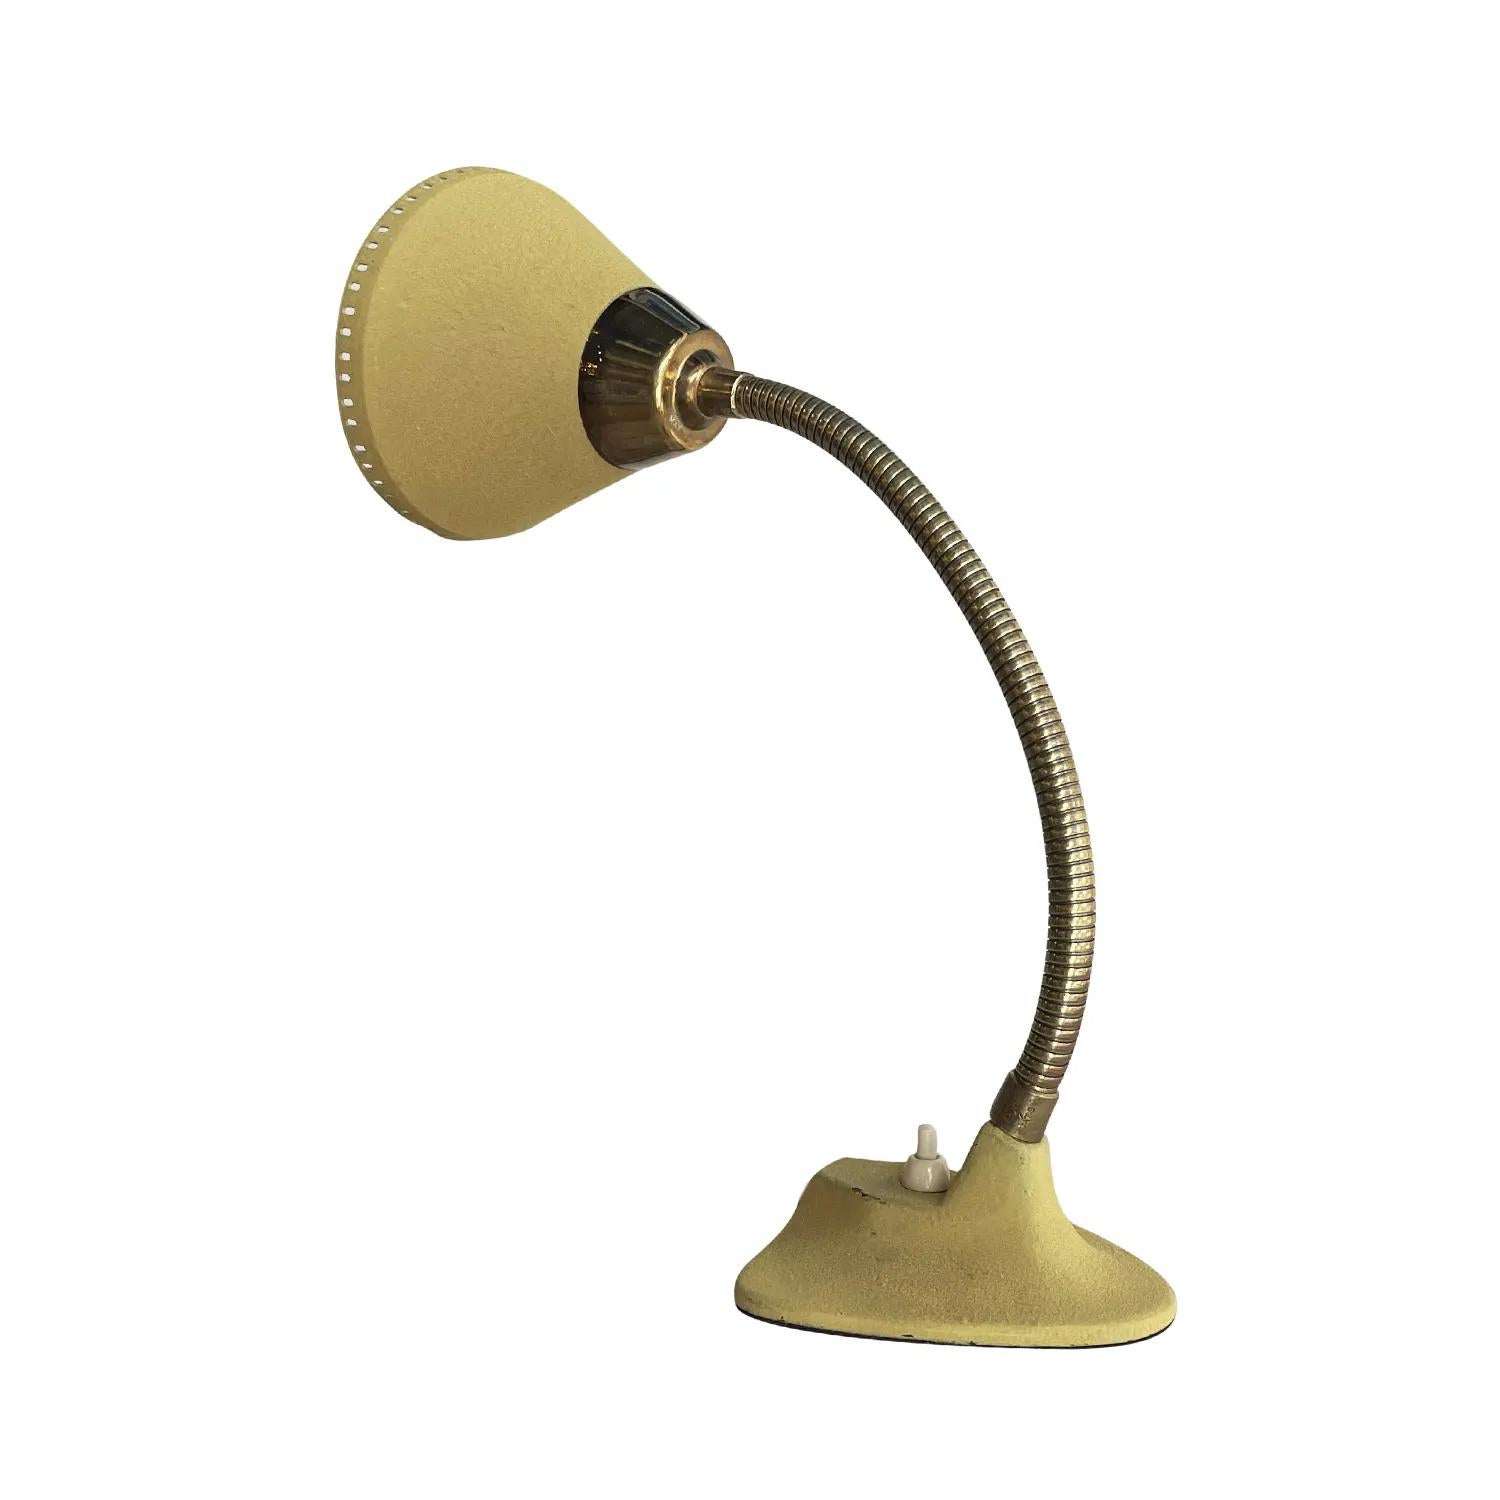 A small, yellow vintage Mid-Century Modern Swedish desk lamp made of hand crafted painted metal, produced by EWÅ, Värnamo in good condition. The Scandinavian table light is composed with a conical mount lacquered metal shade, supported by a